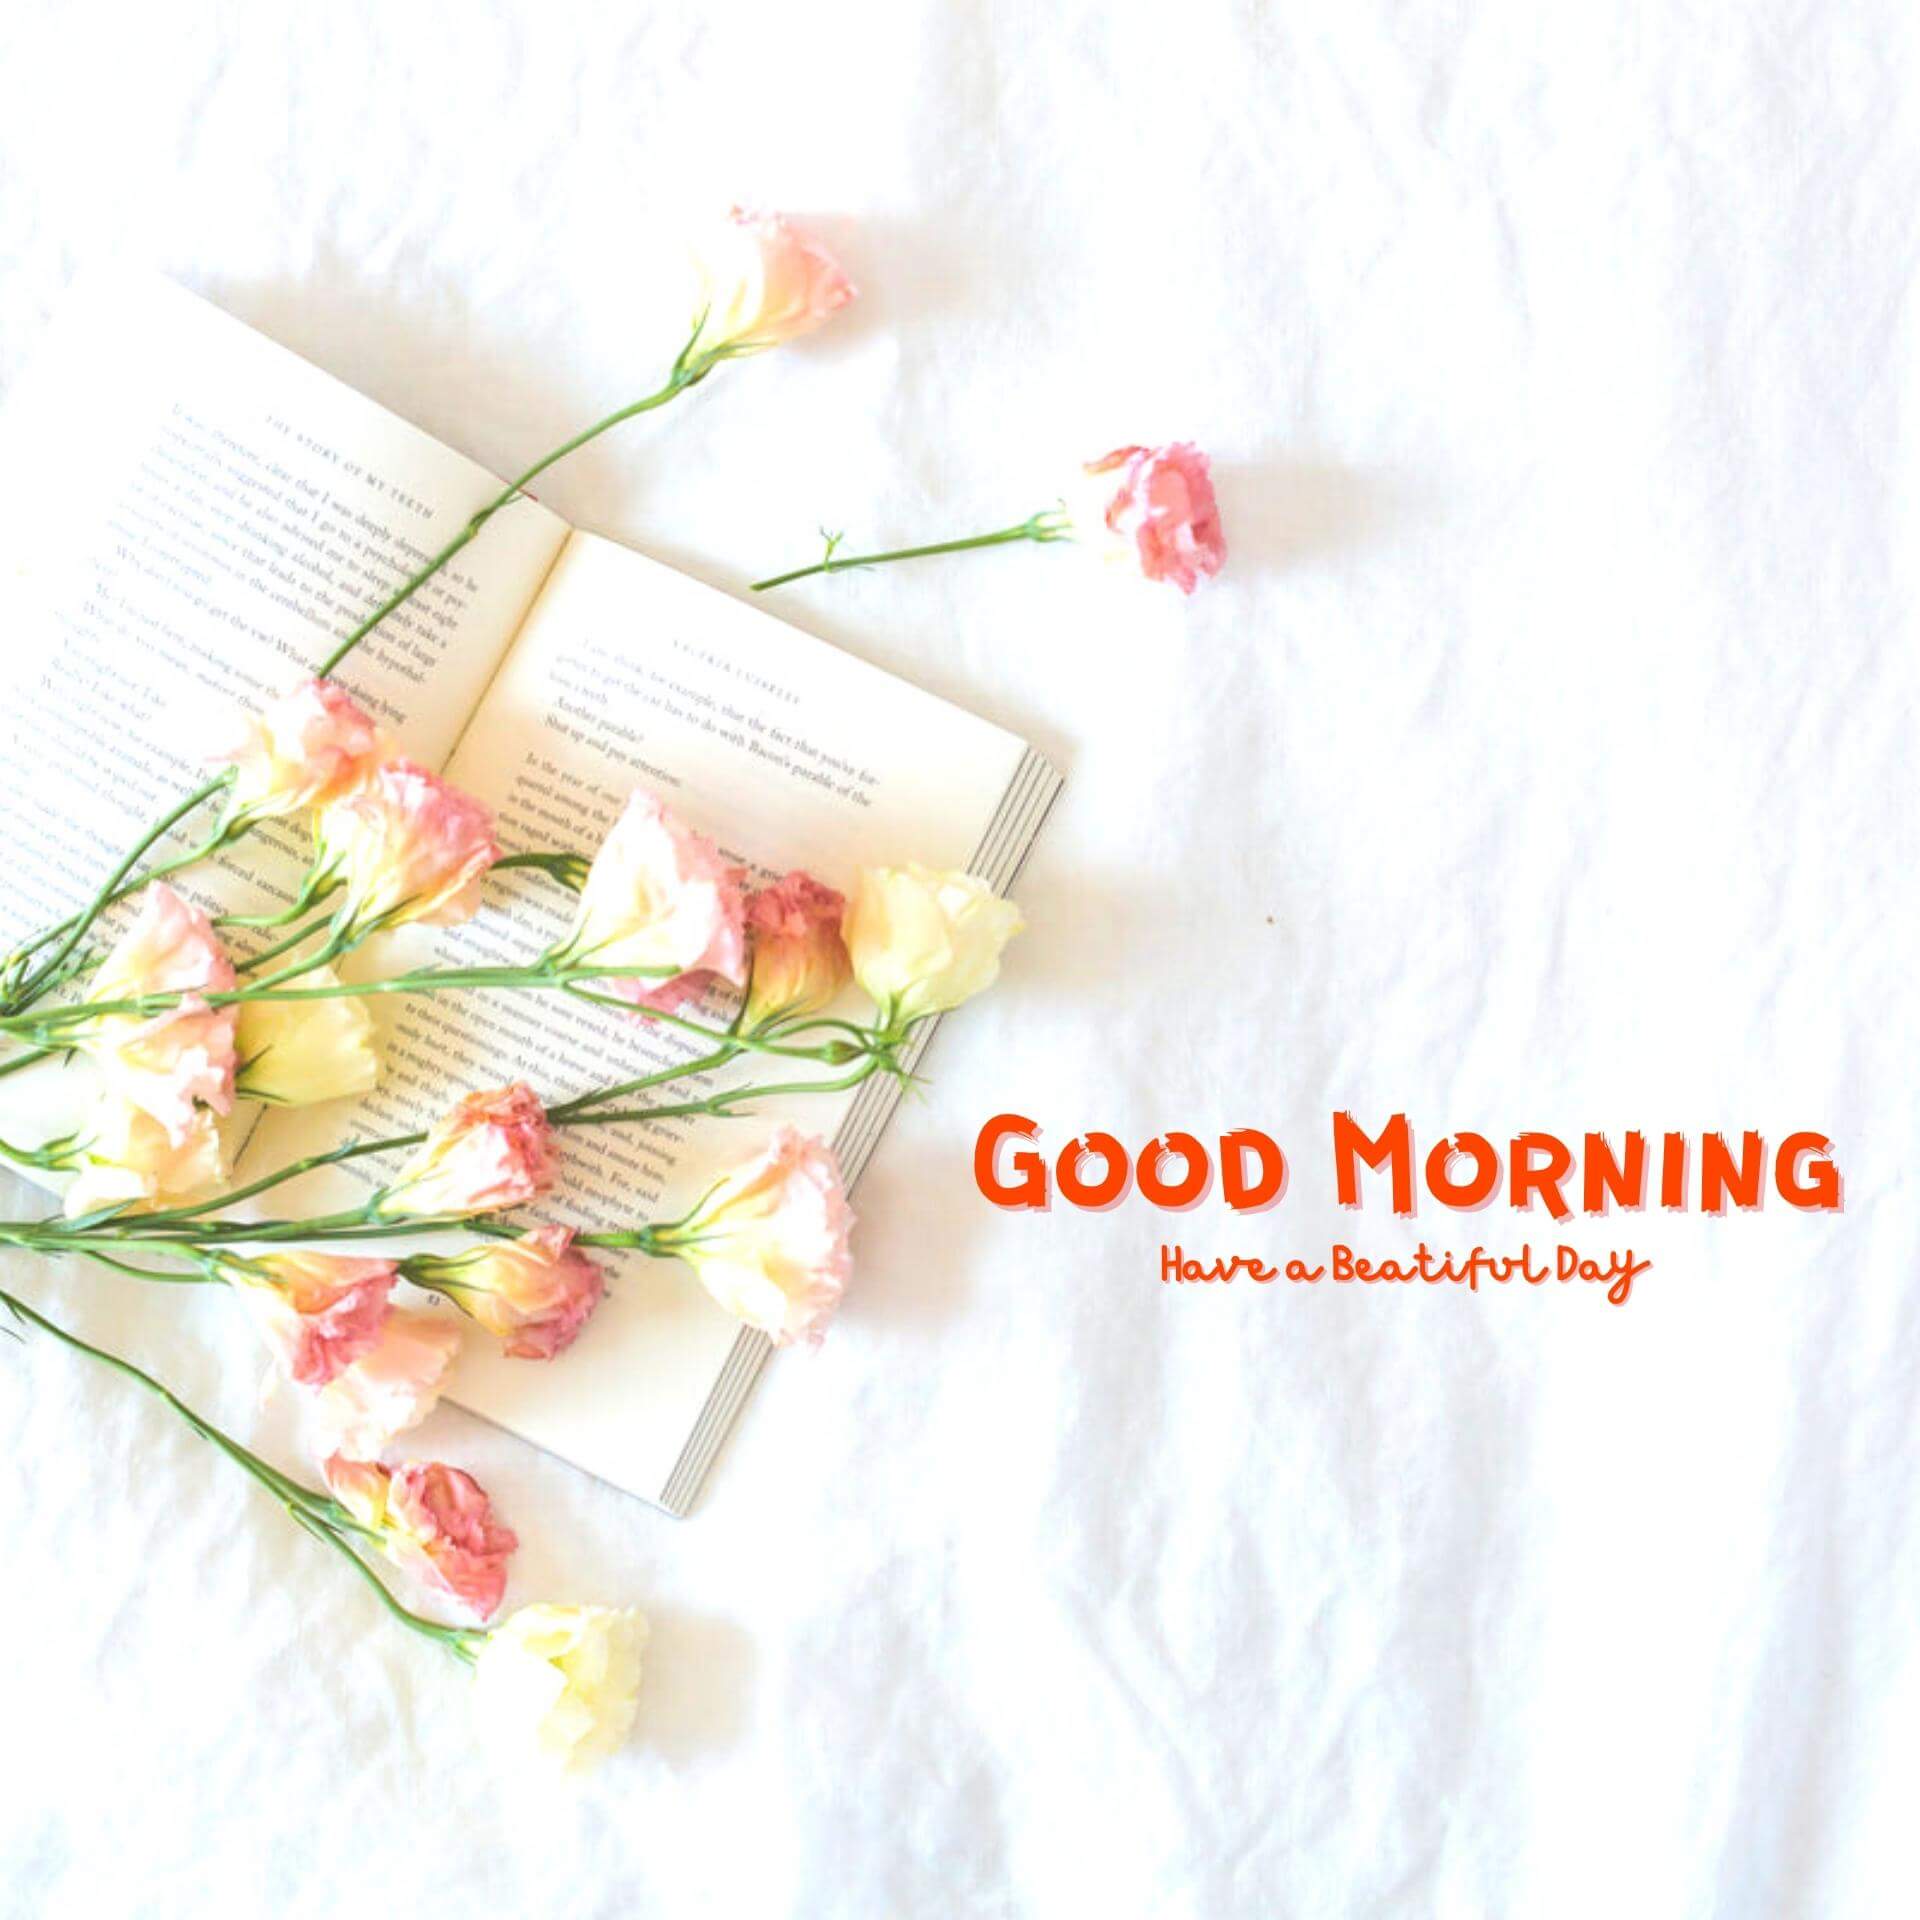 www.good morning images free download